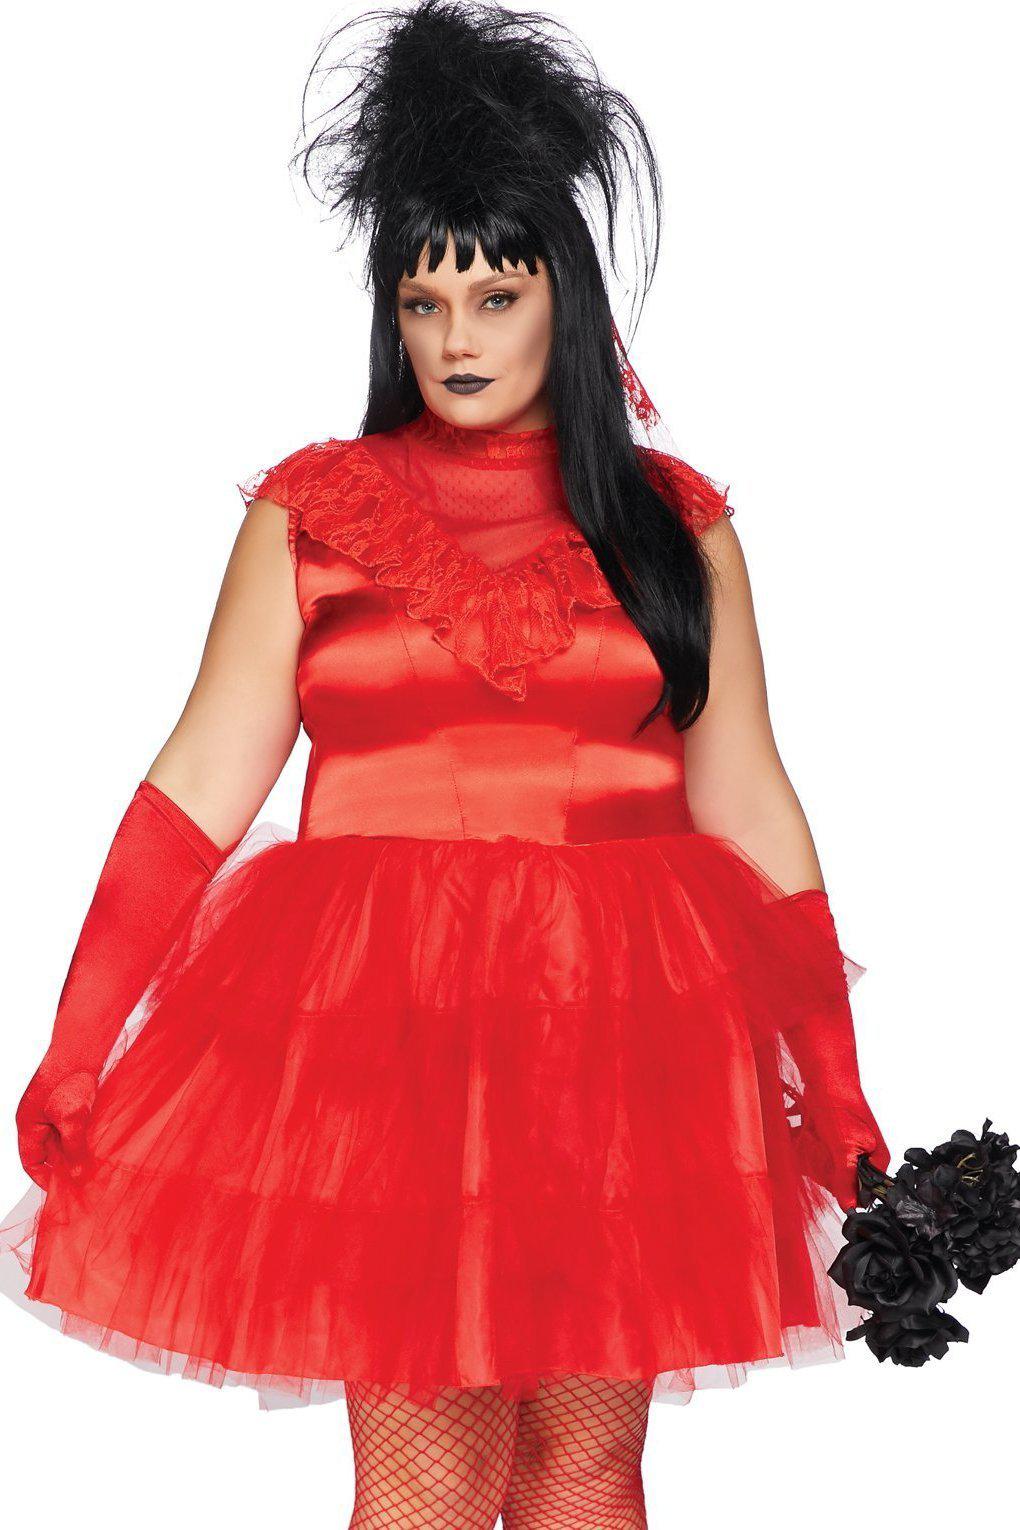 Plus Size Beetle Bride Costume-Other Costumes-Leg Avenue-Red-1/2XL-SEXYSHOES.COM